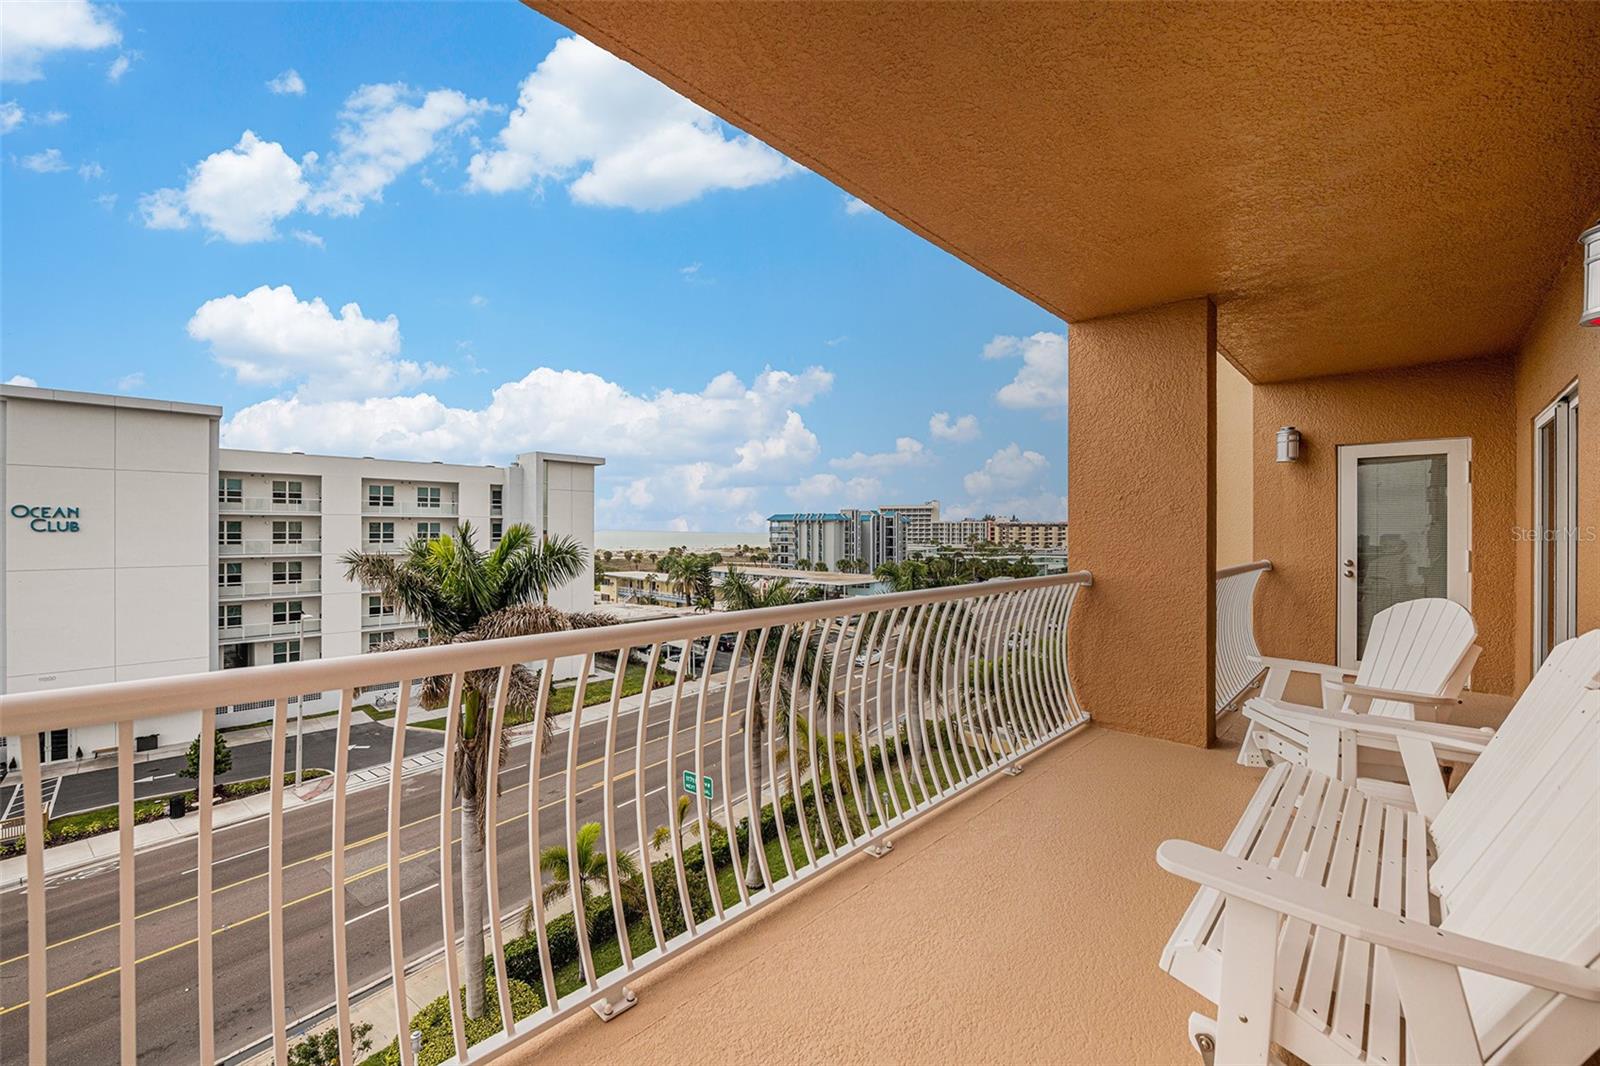 This!  A patio the size of a back yard!  Swim spa, views of docks, community pool, boats, and sunrises will keep you from leaving this part of the home! Amazing space with views that extend for miles.